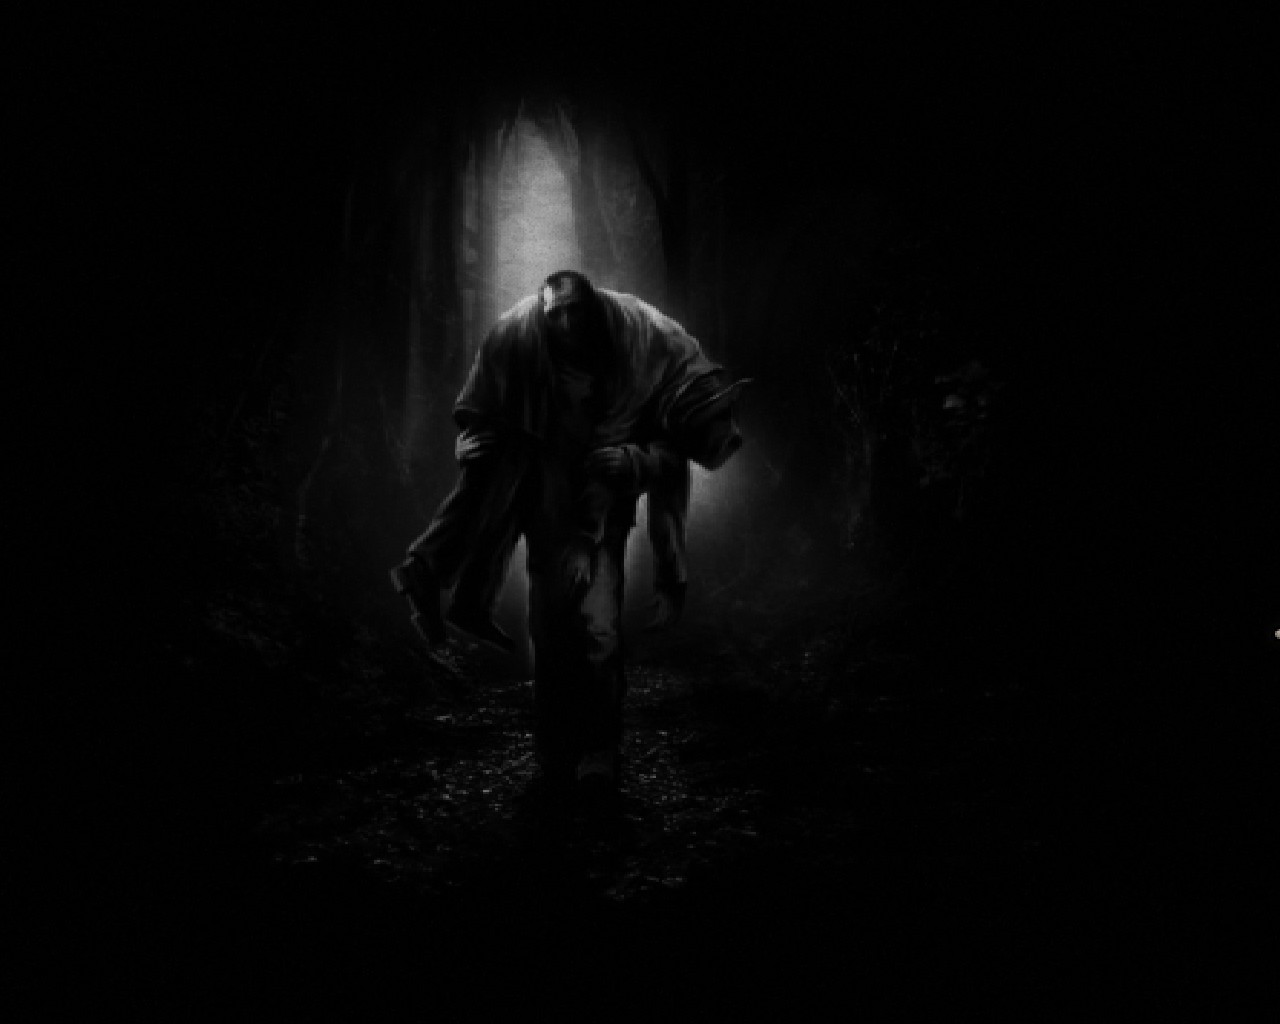 Artistry in Games 2014-07-29_00026 Darkwood Preview Opinion  wood top-down top third person third Survival horror survival steam souls person PC Mac Linux isometric horror hardcore Early Access early down Darkwood dark souls Dark access  